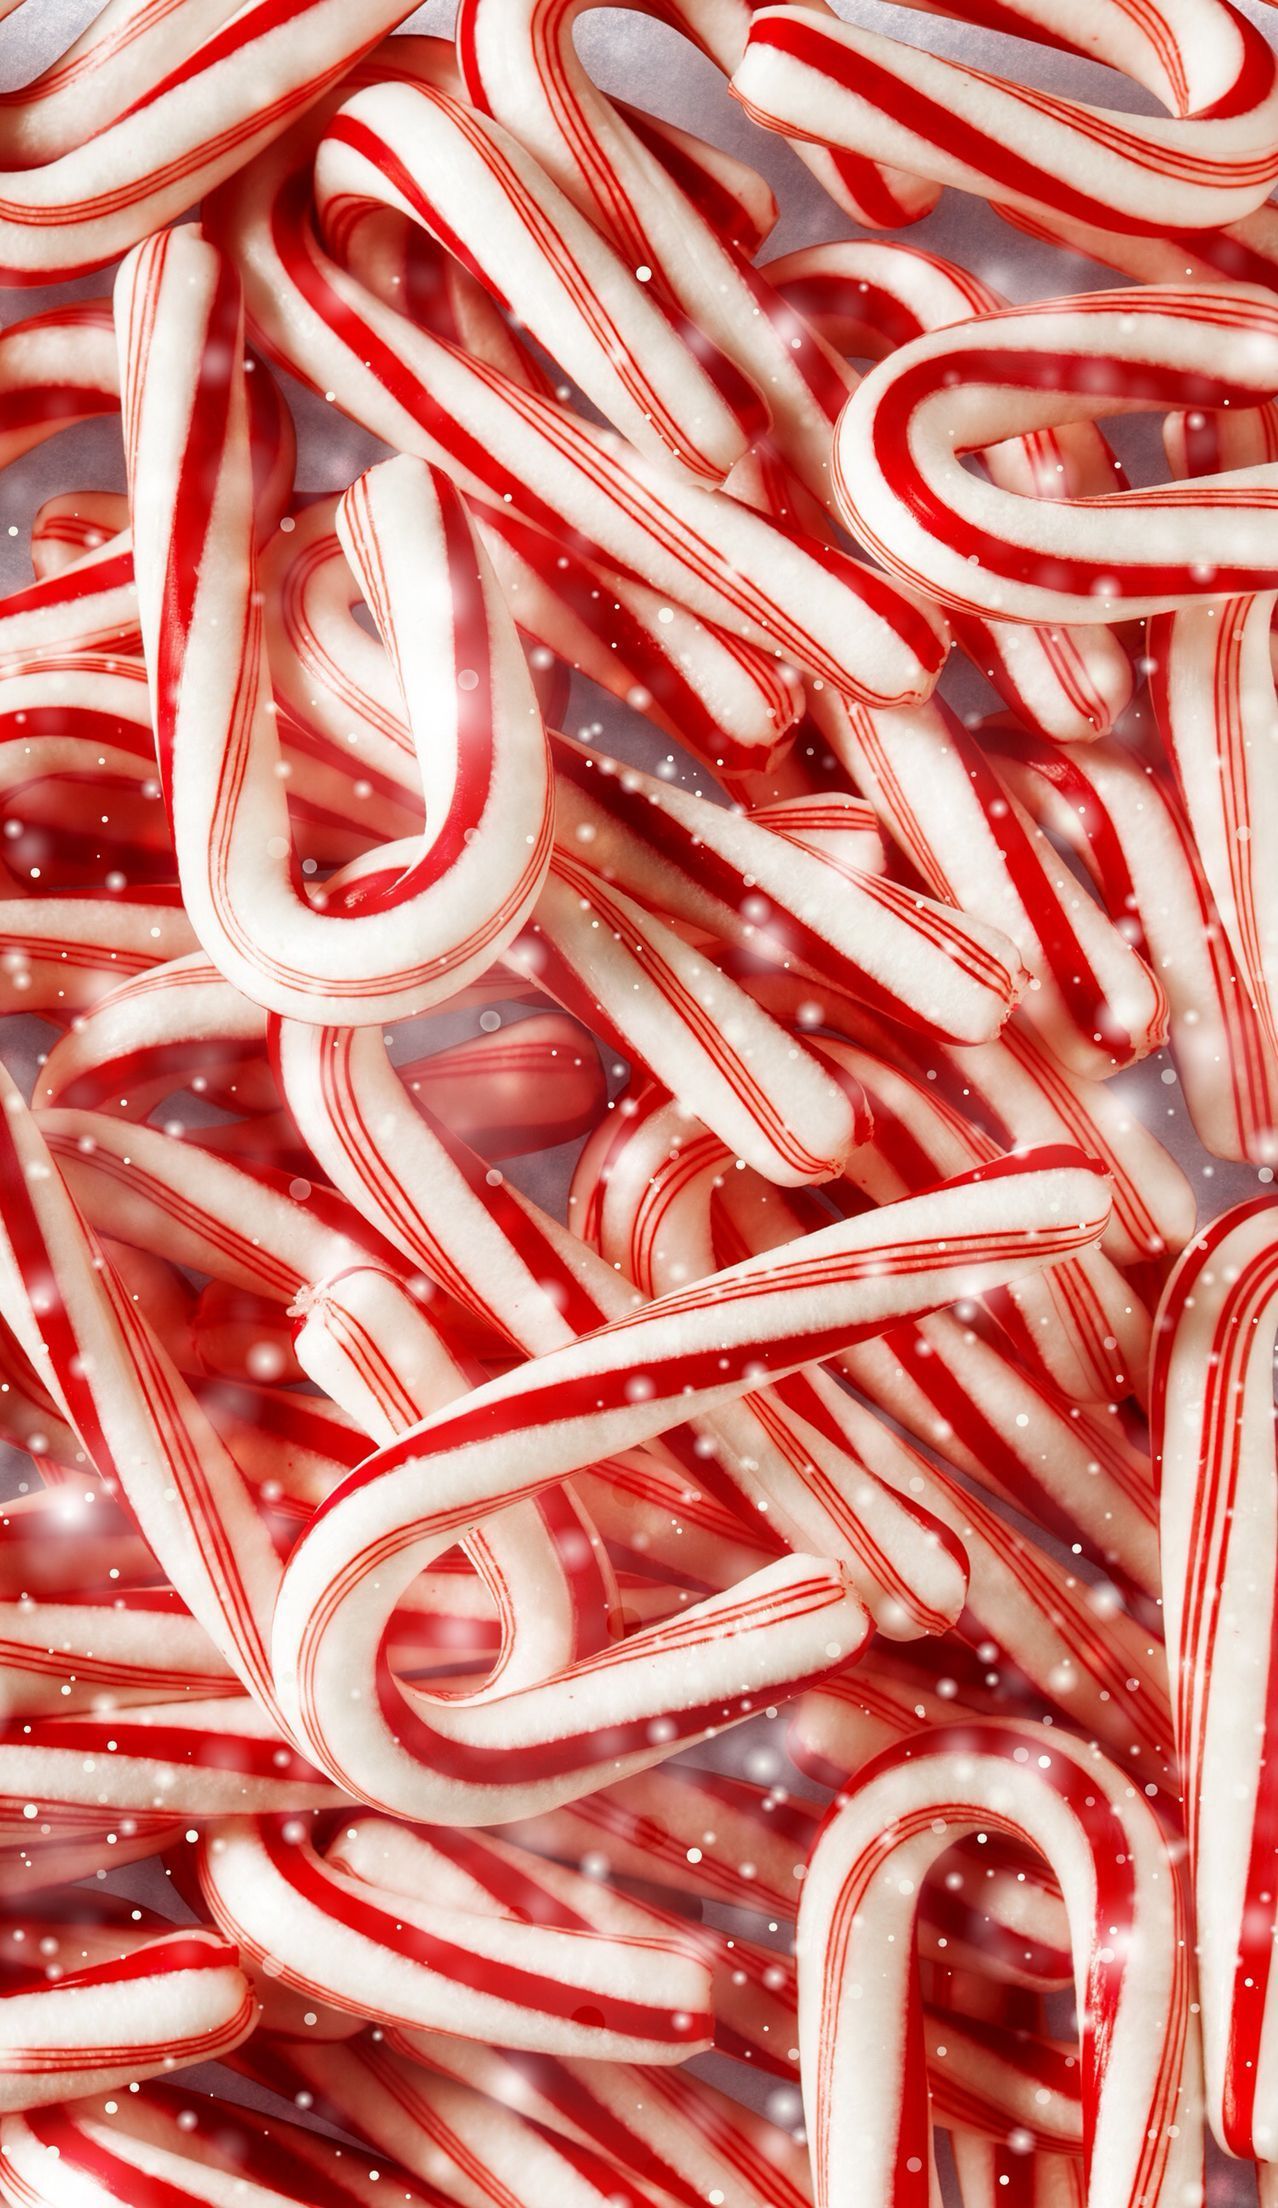 A close up of candy canes in a pile - Candy, candy cane